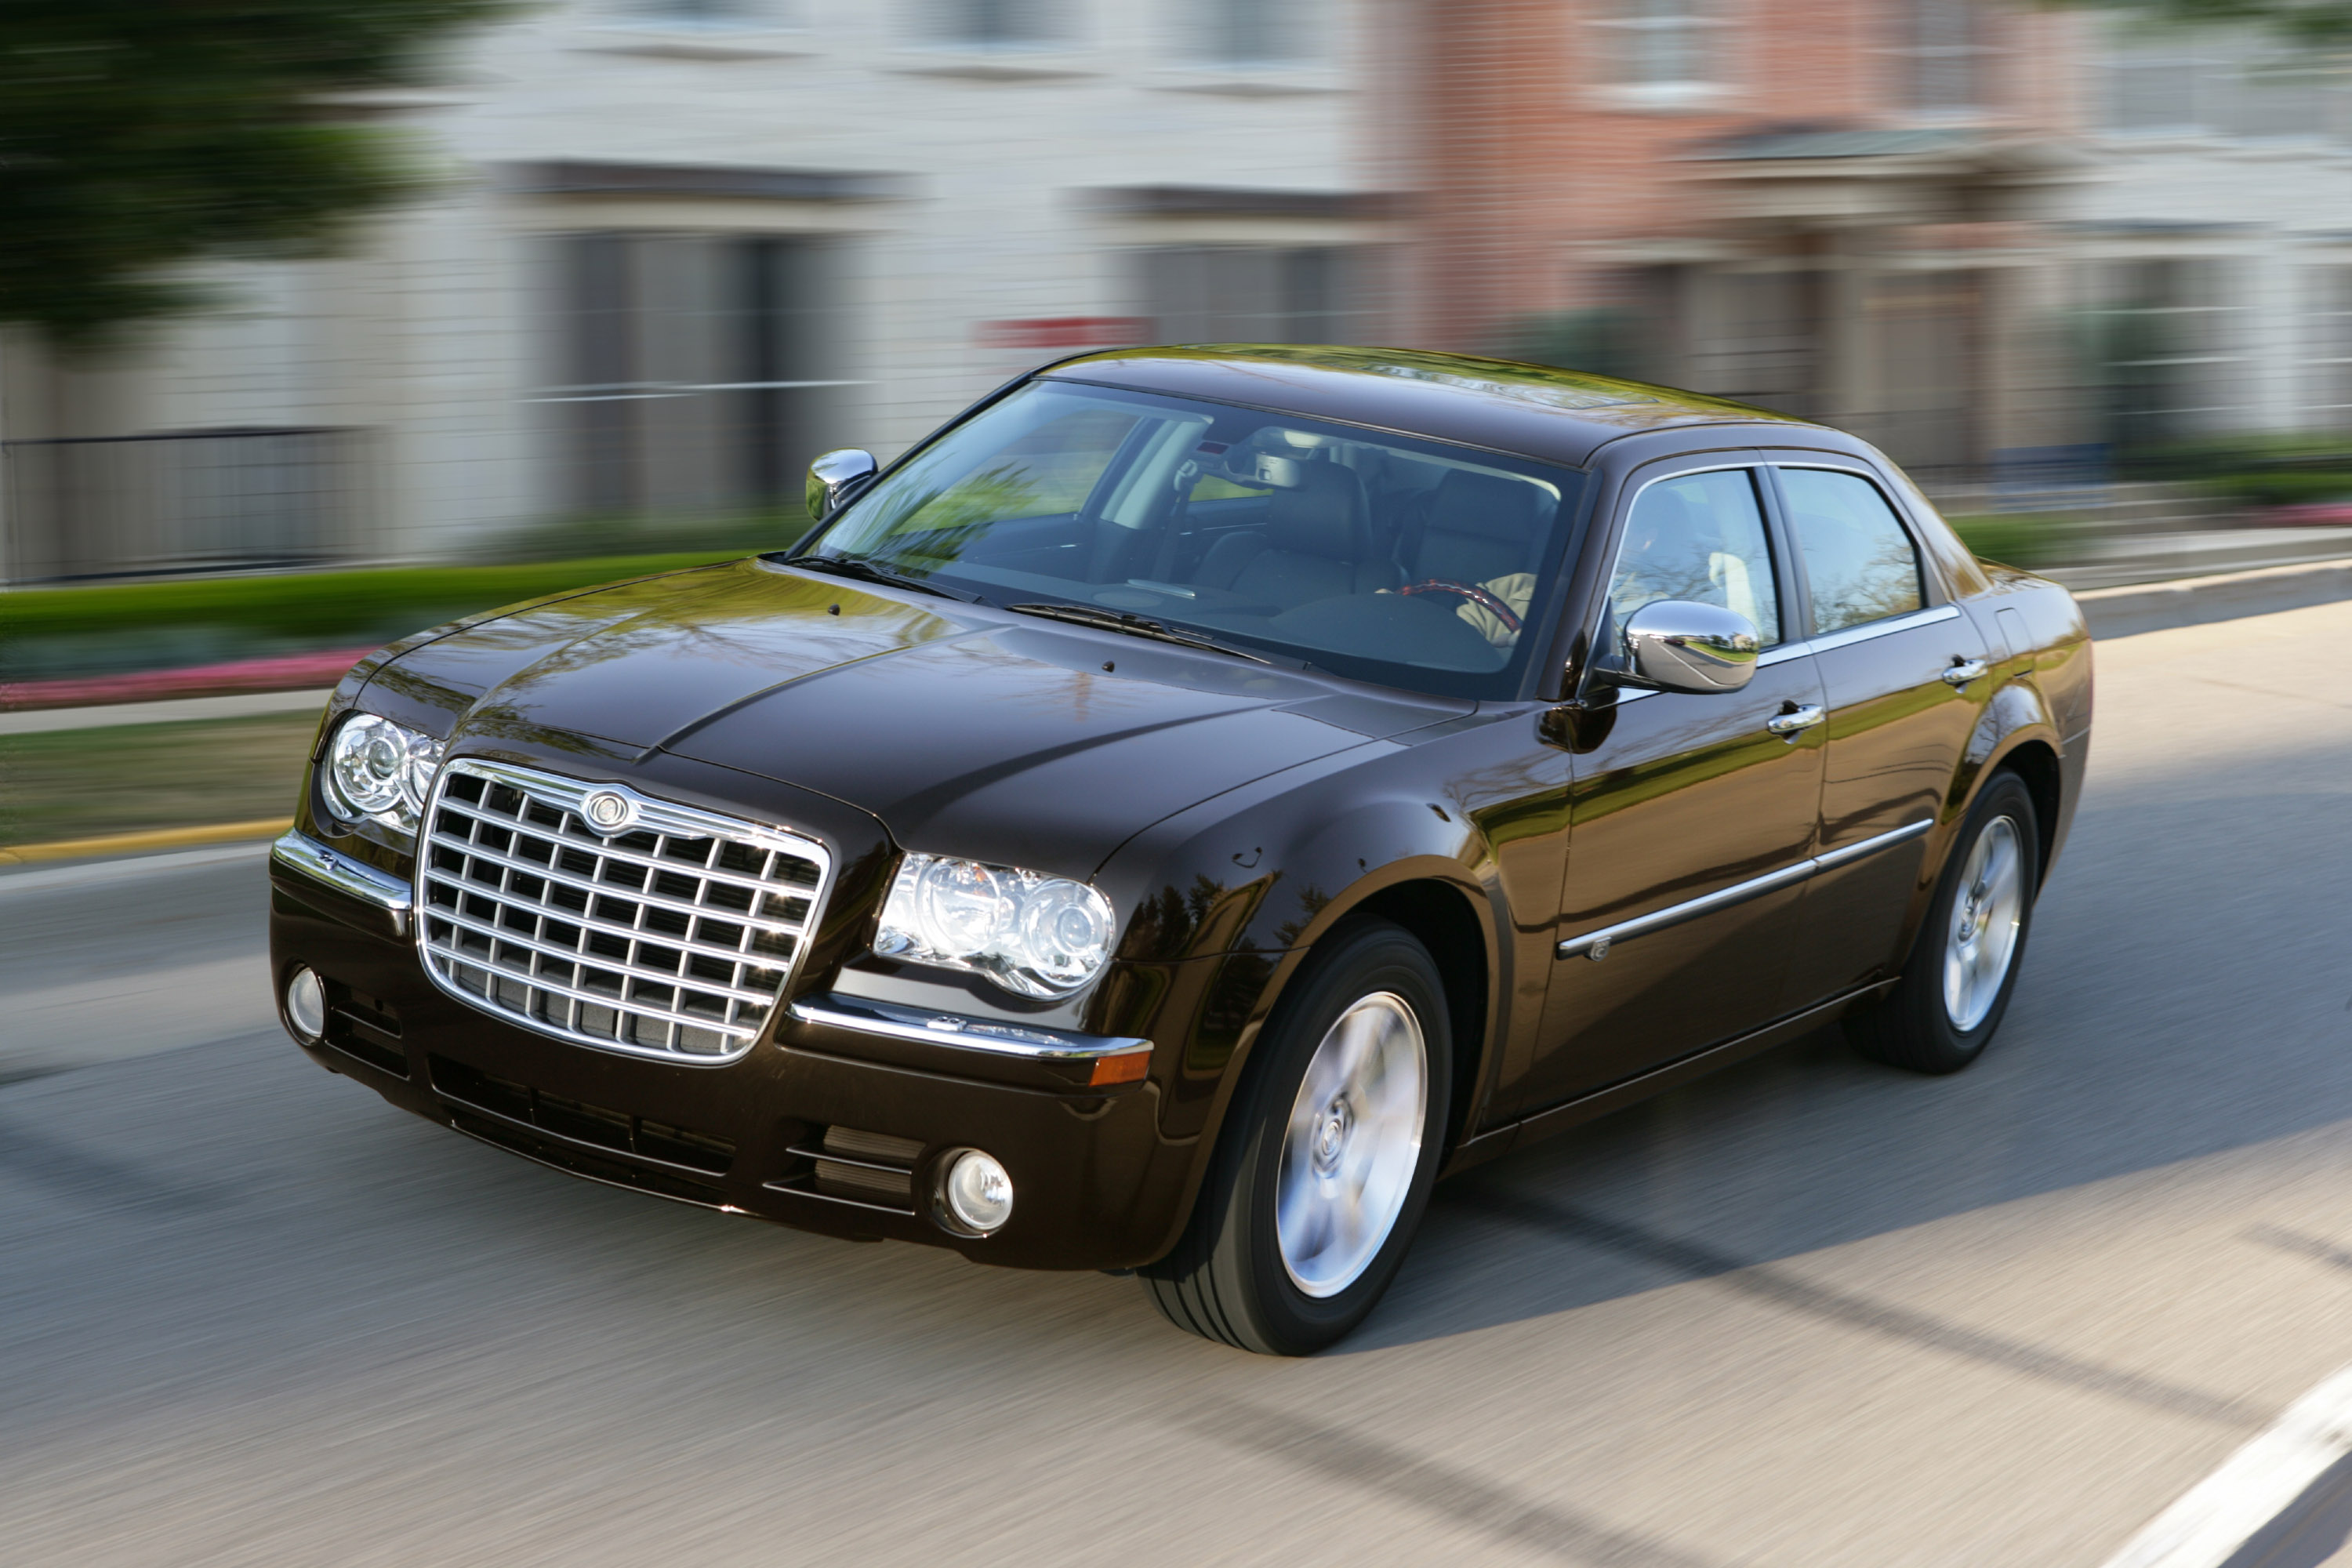 2010 Chrysler 300C classic American vision at attractive